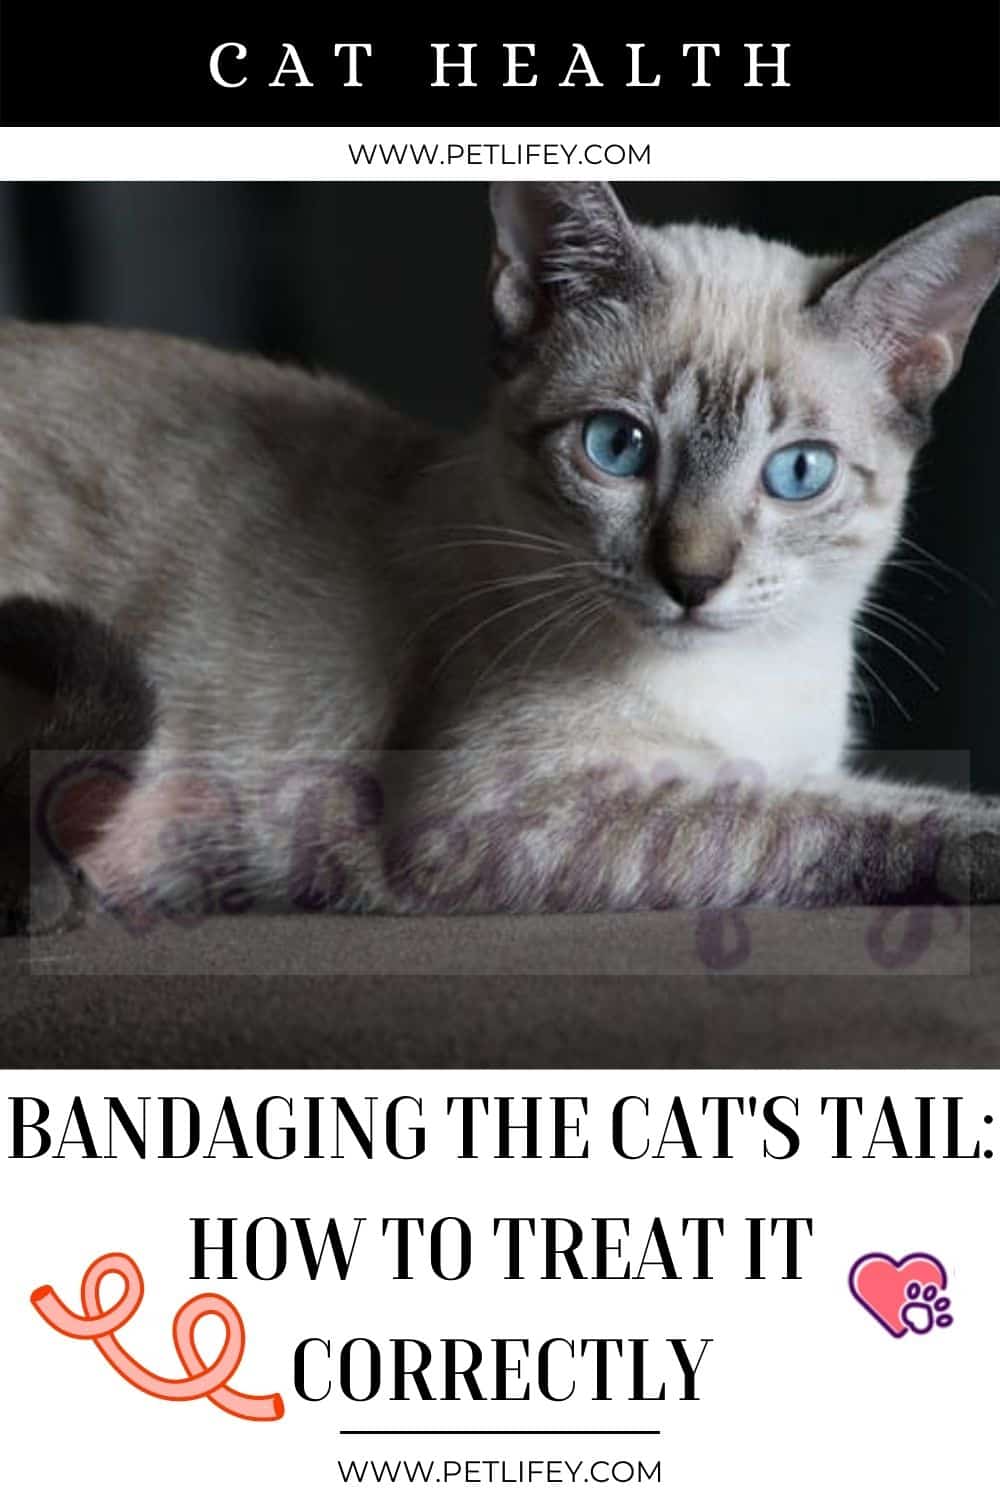 Bandaging the cat's tail